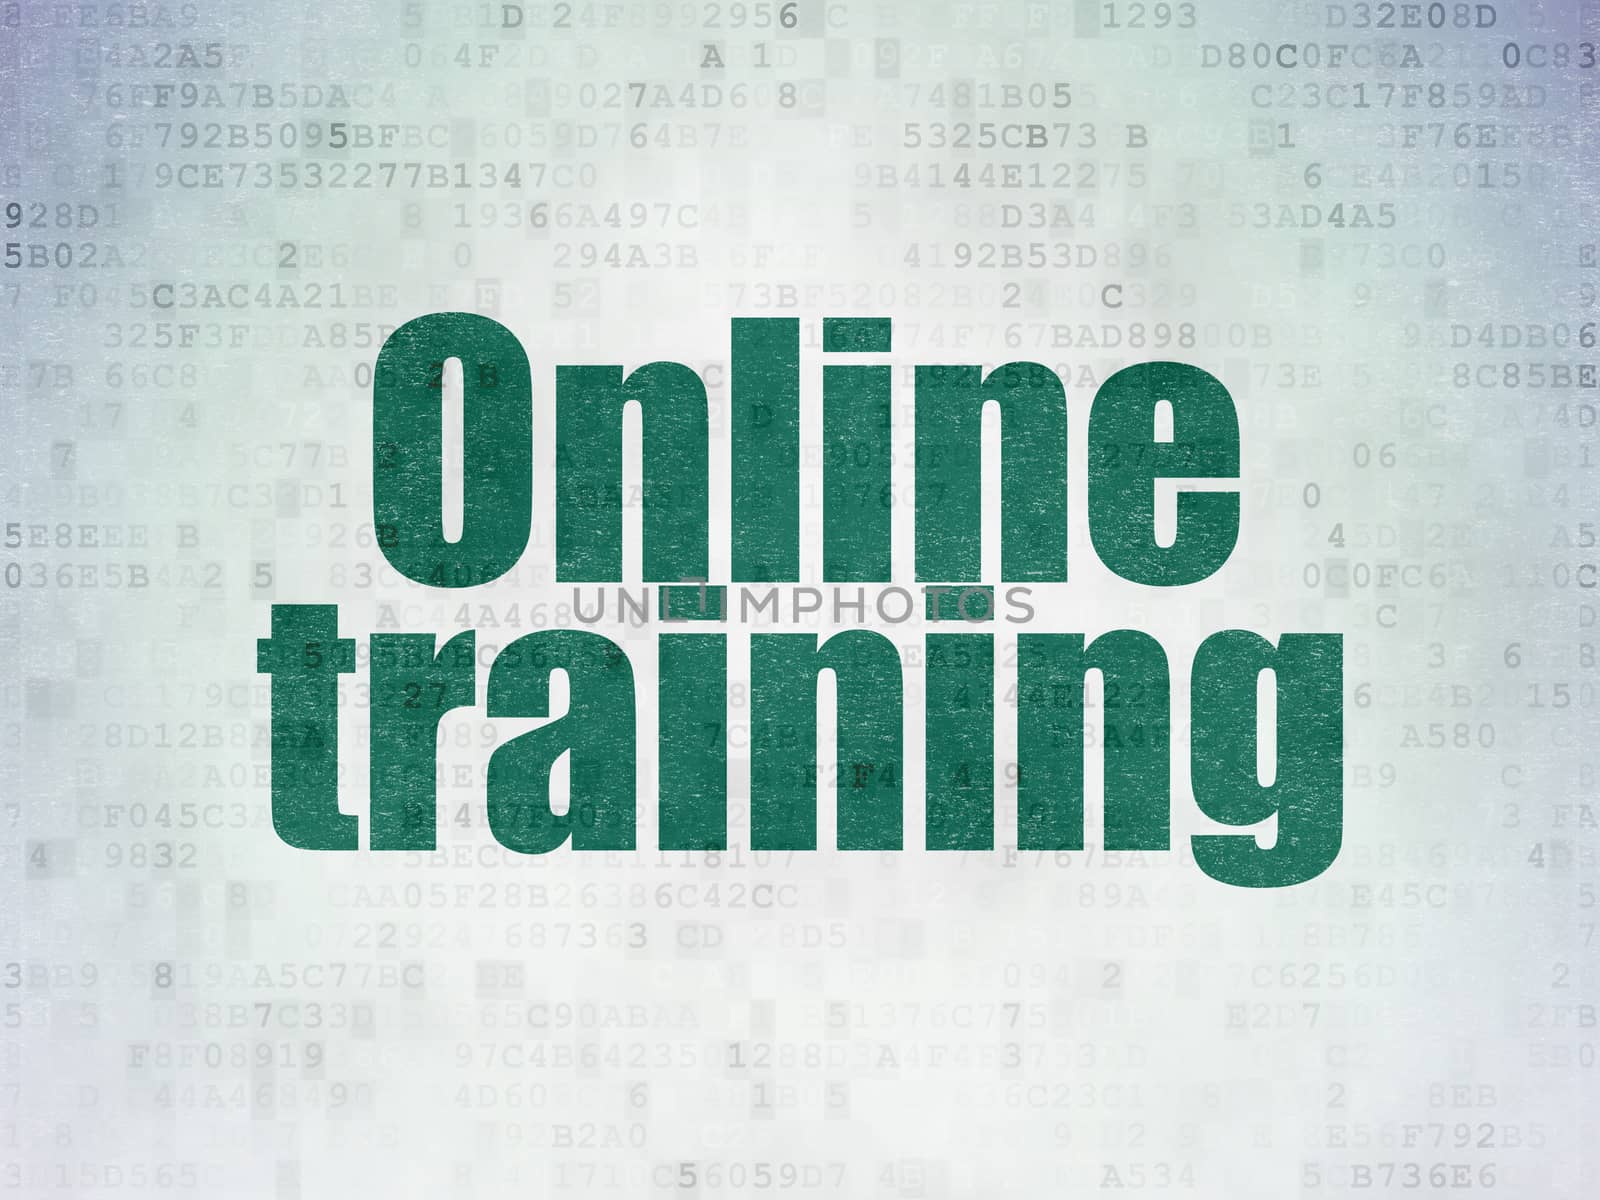 Learning concept: Painted green word Online Training on Digital Data Paper background